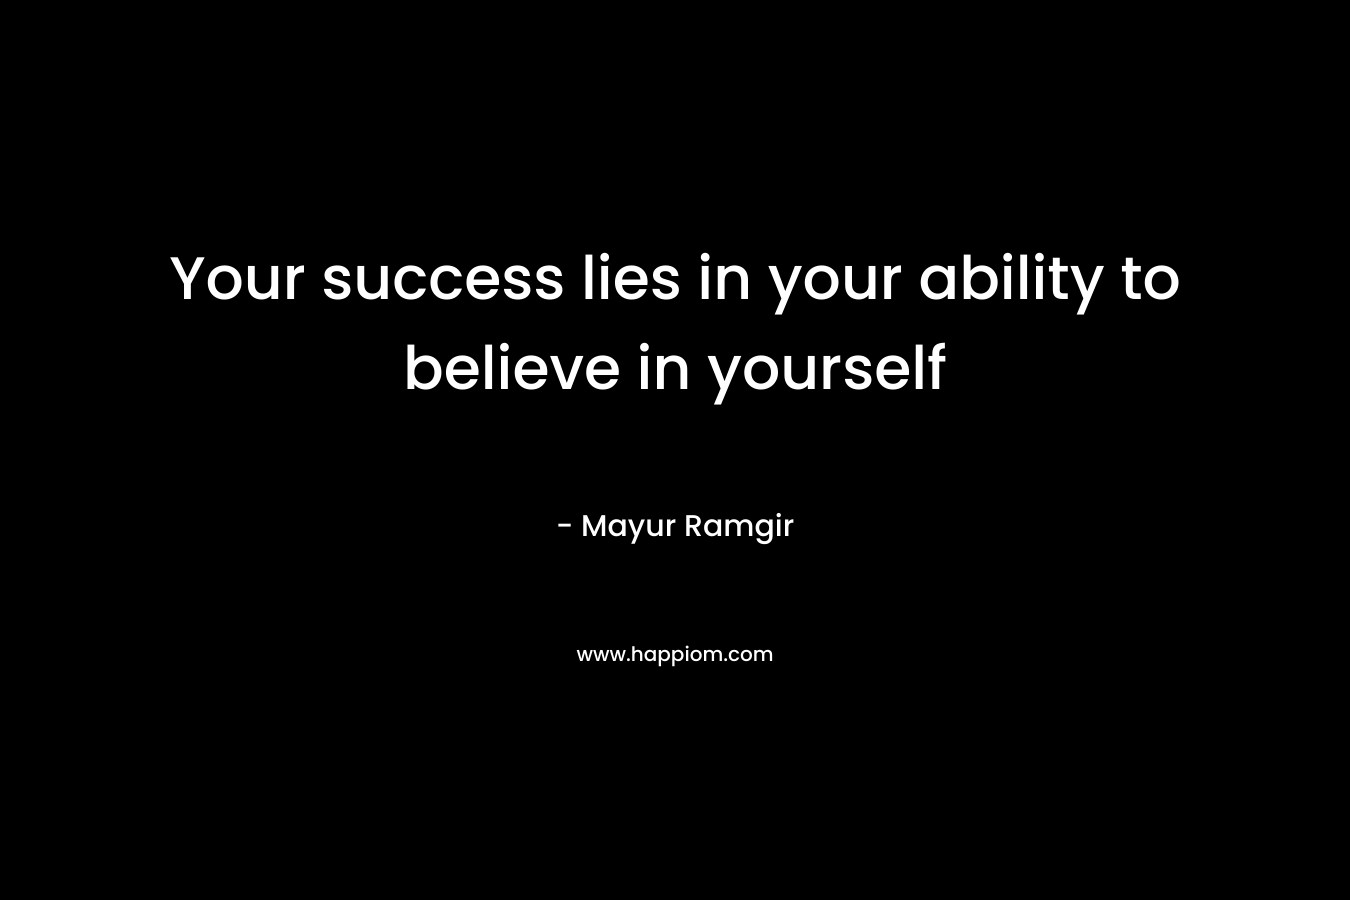 Your success lies in your ability to believe in yourself